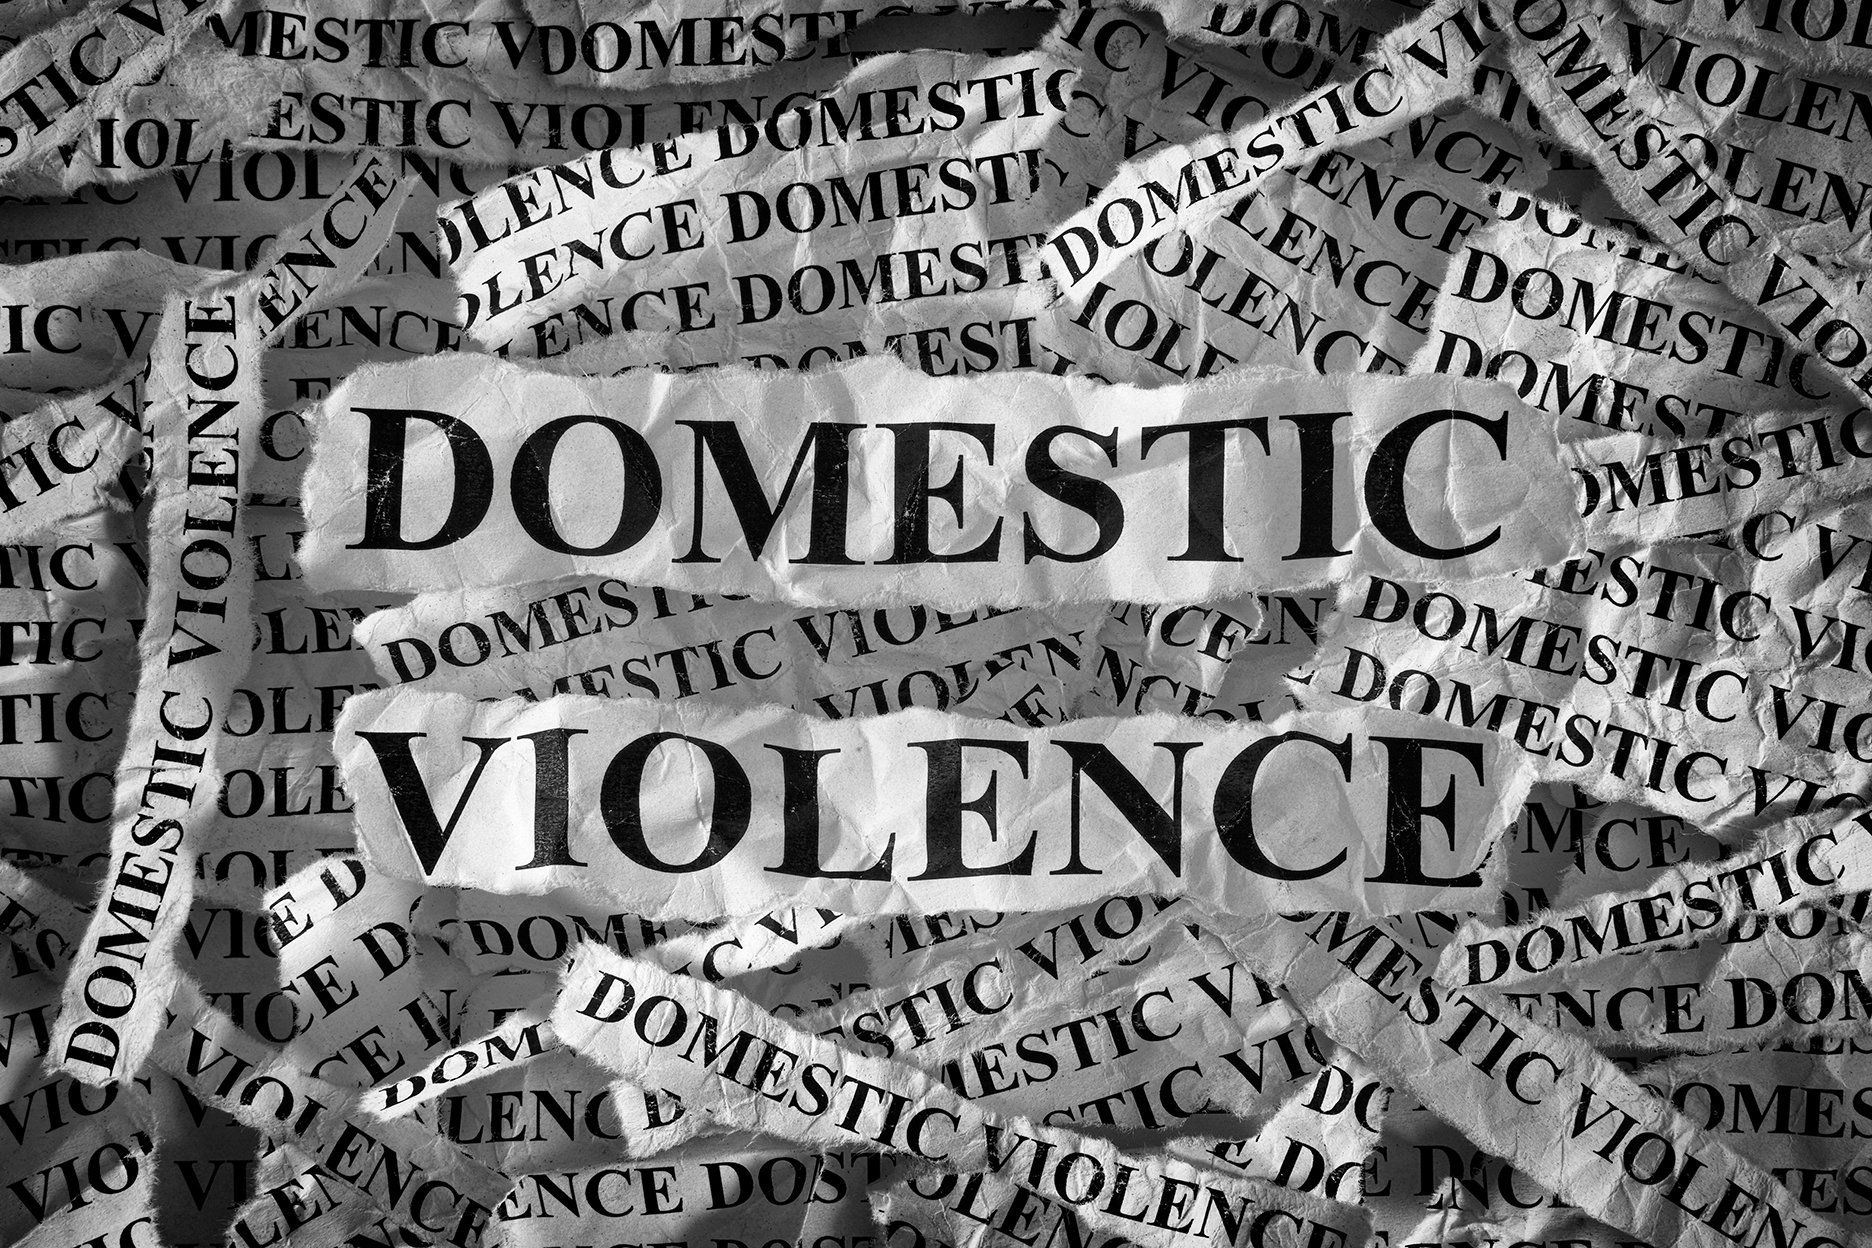 Possible Consequences of a Domestic Violence Conviction